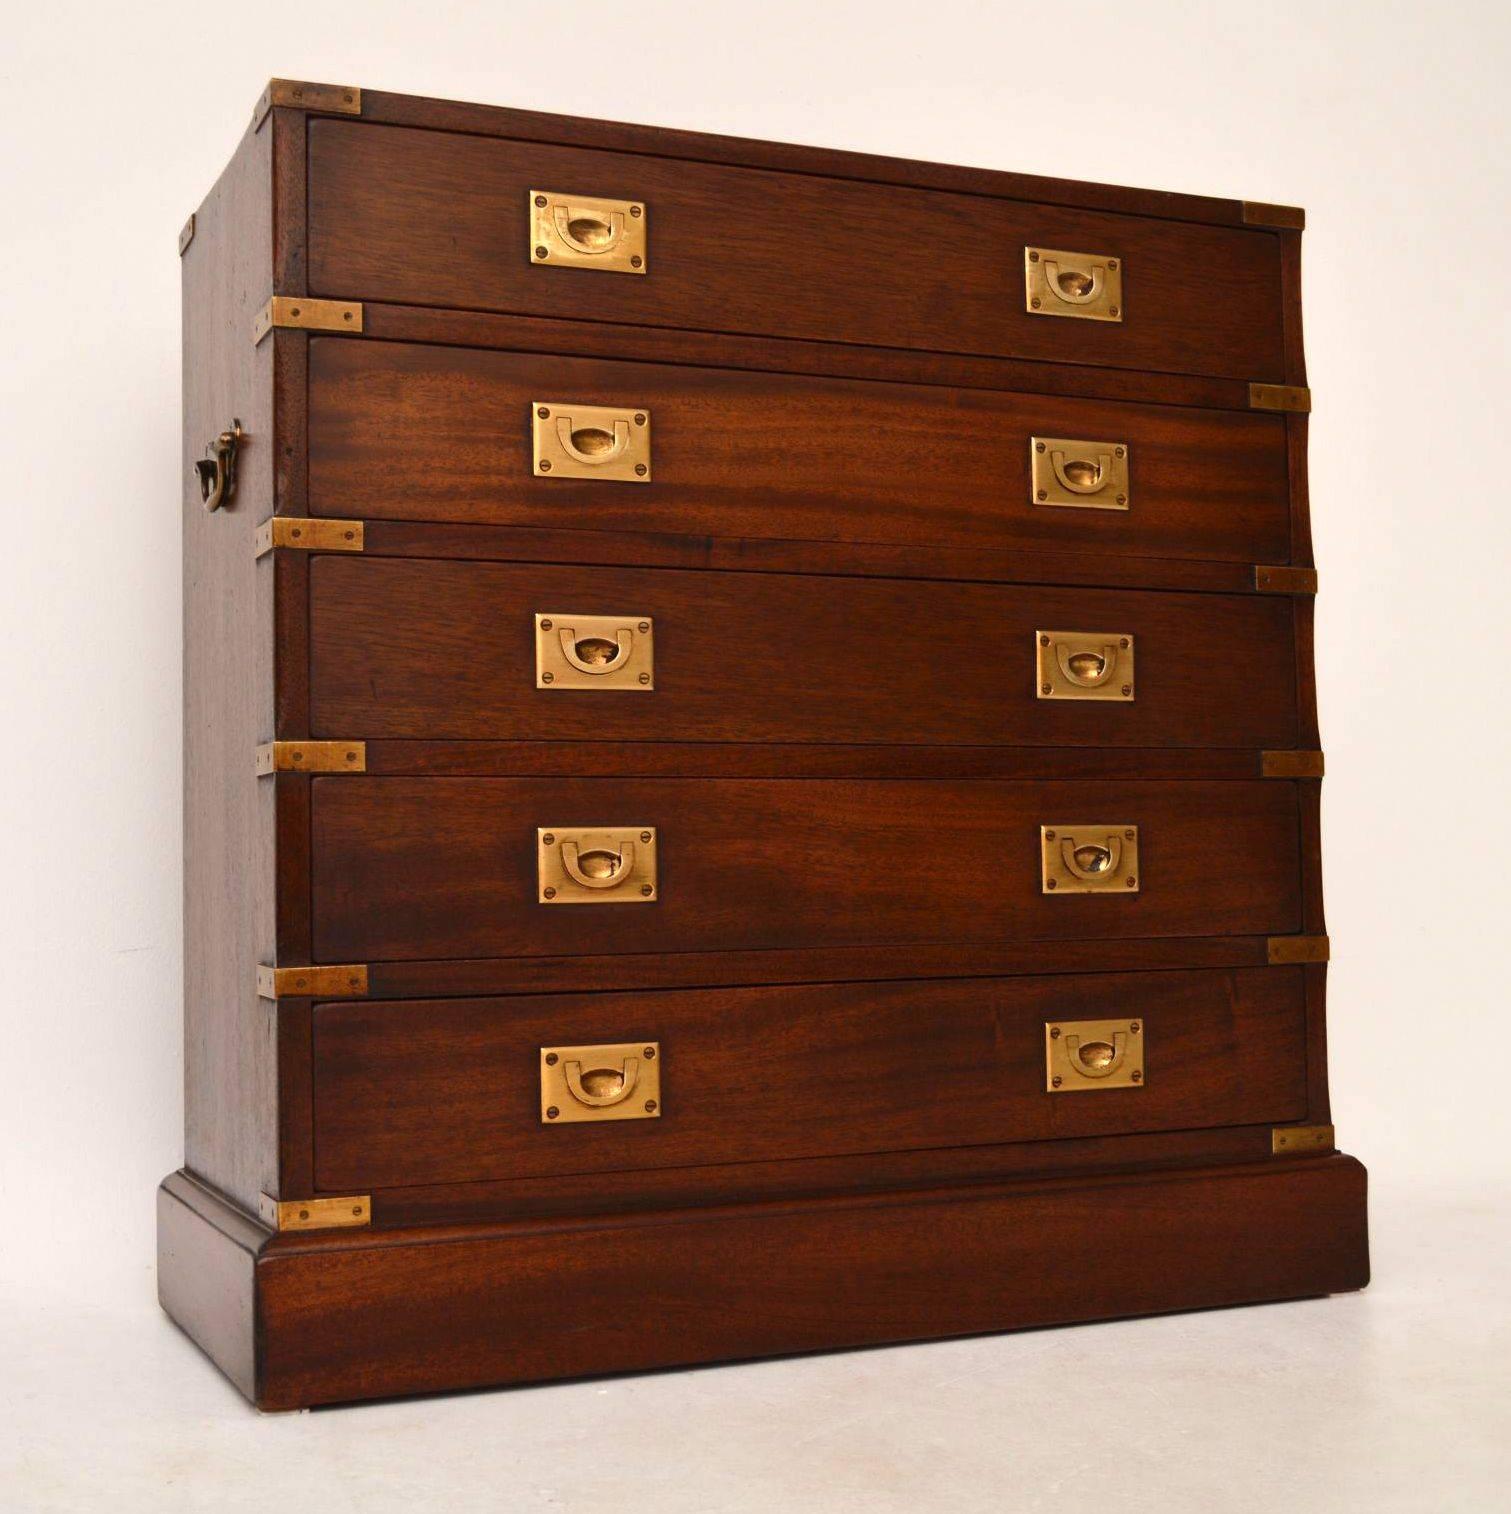 Antique campaign style mahogany chest of drawers with brass corners and brass inset military style handles. It also has brass carrying handles. This chest is in good condition, having just been polished and I would date it to around the 1930s